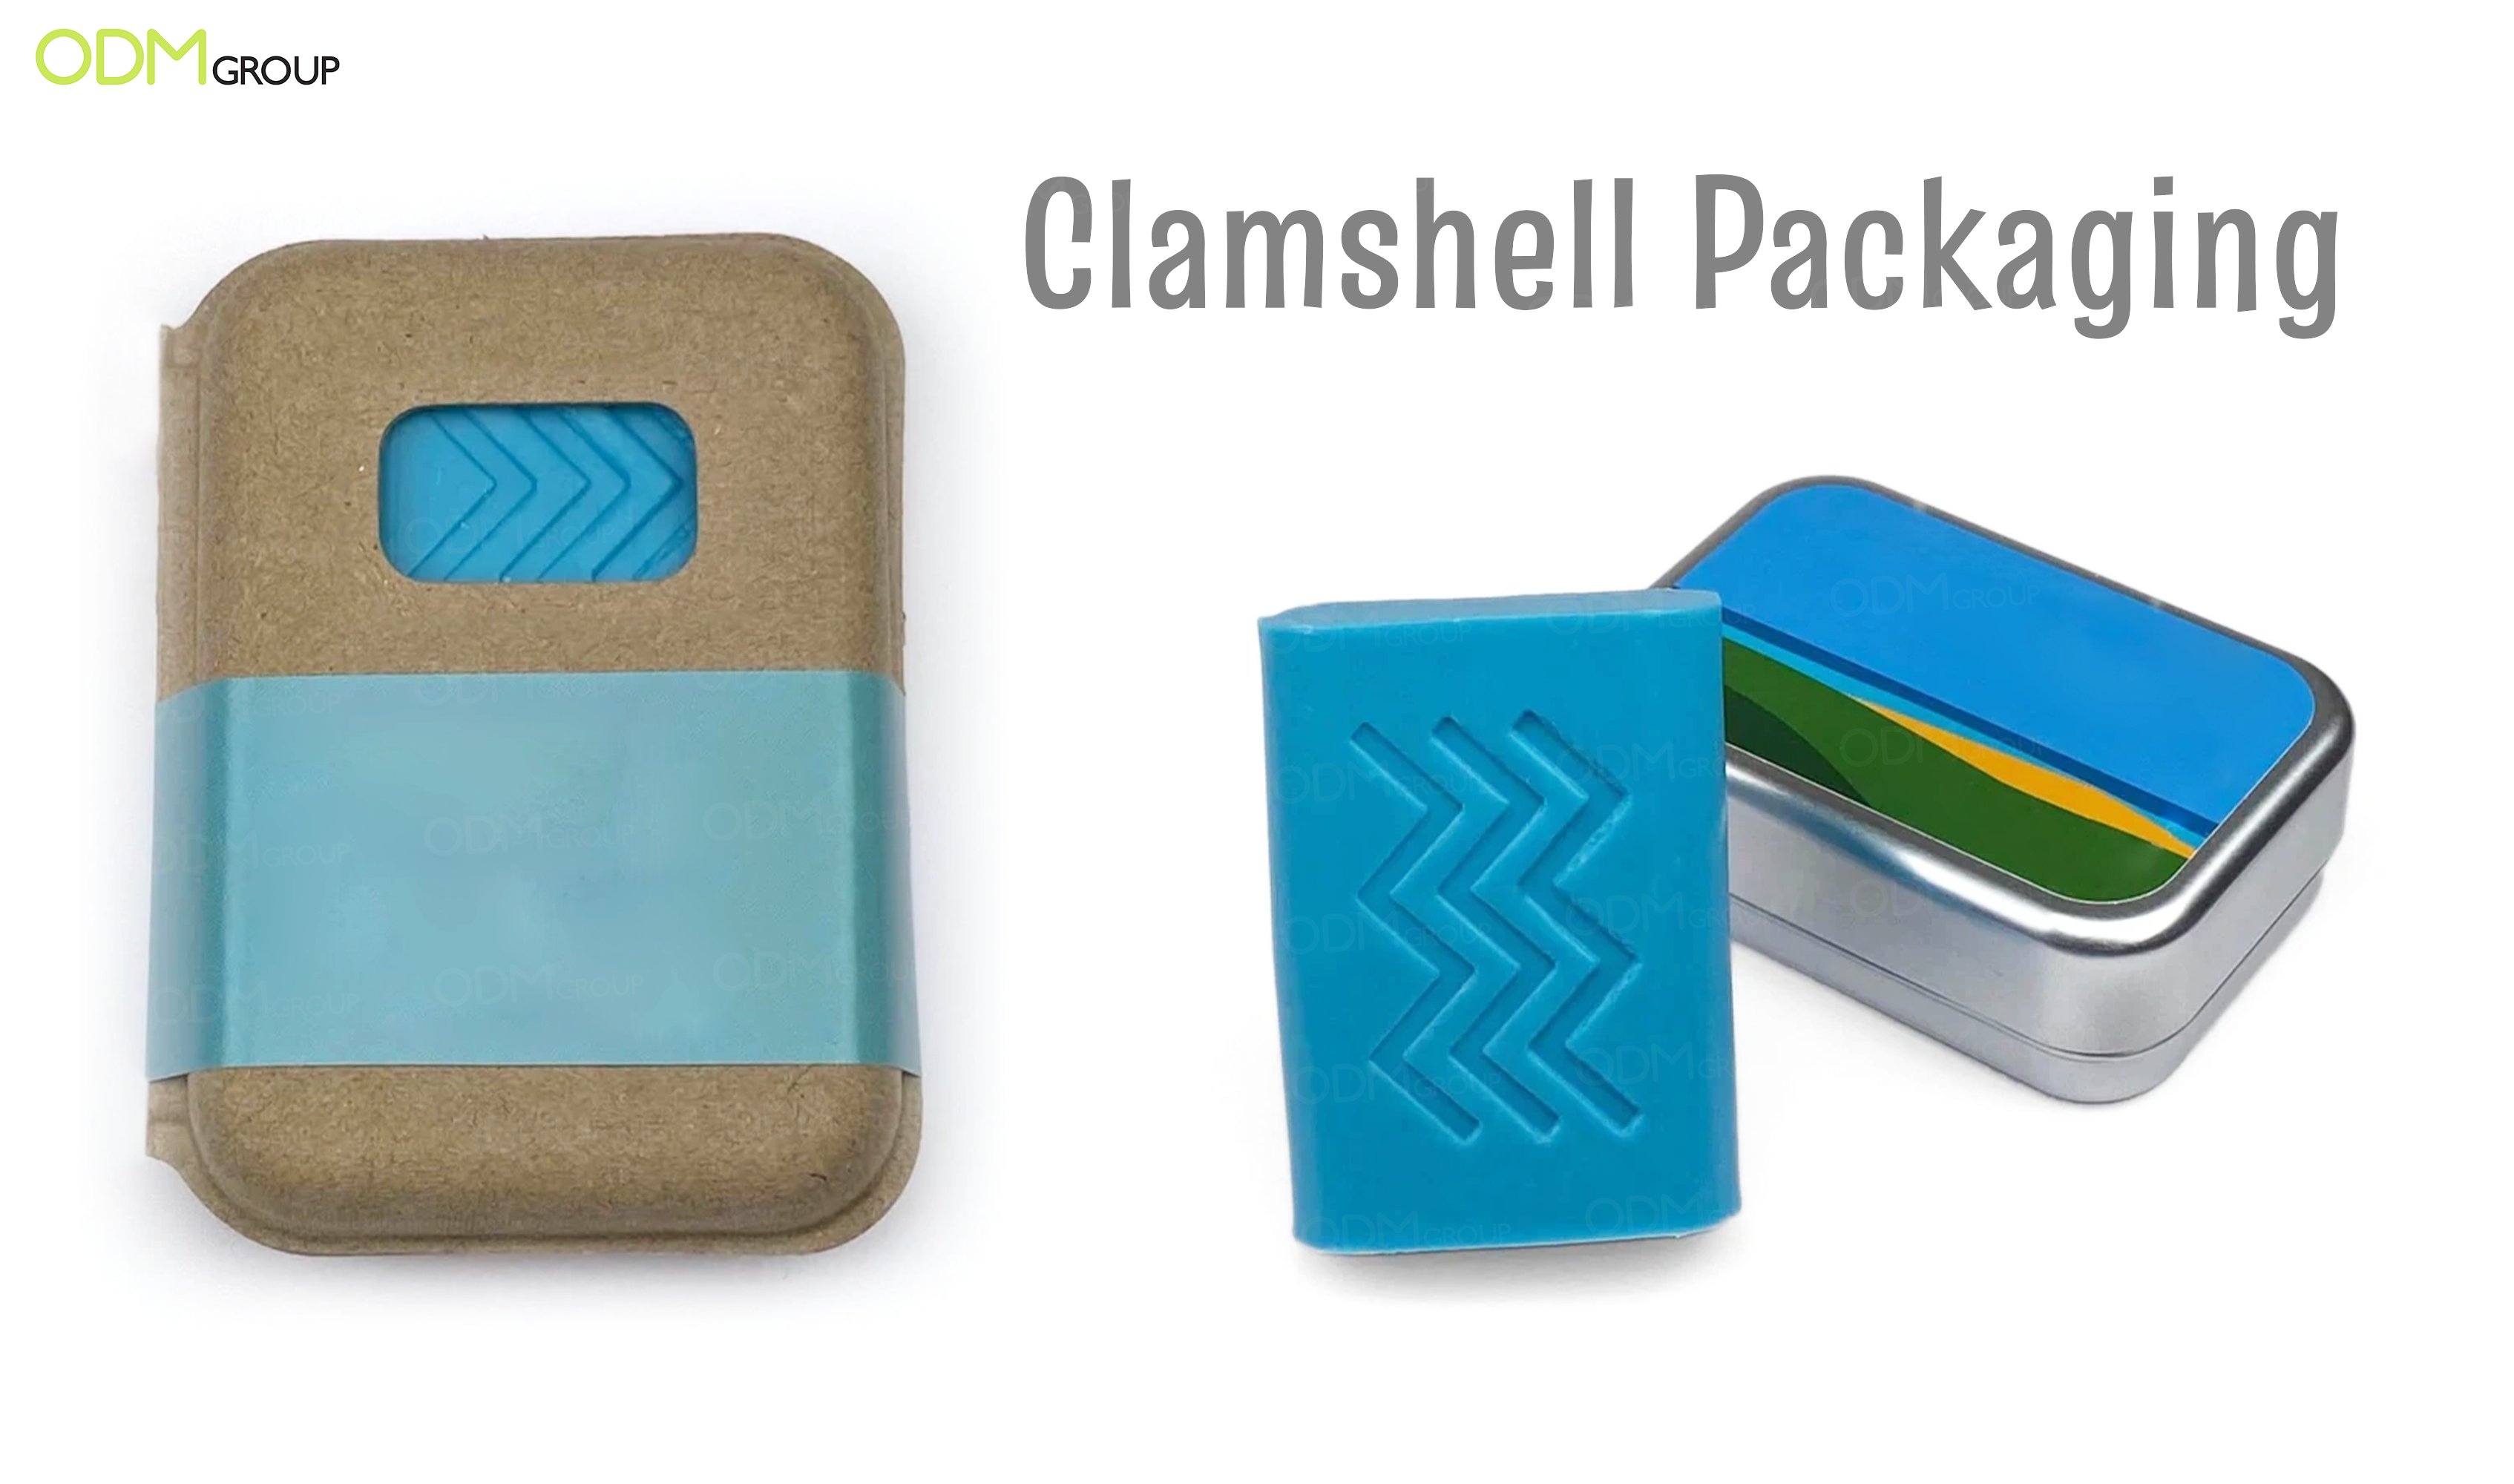 Clamshell packaging